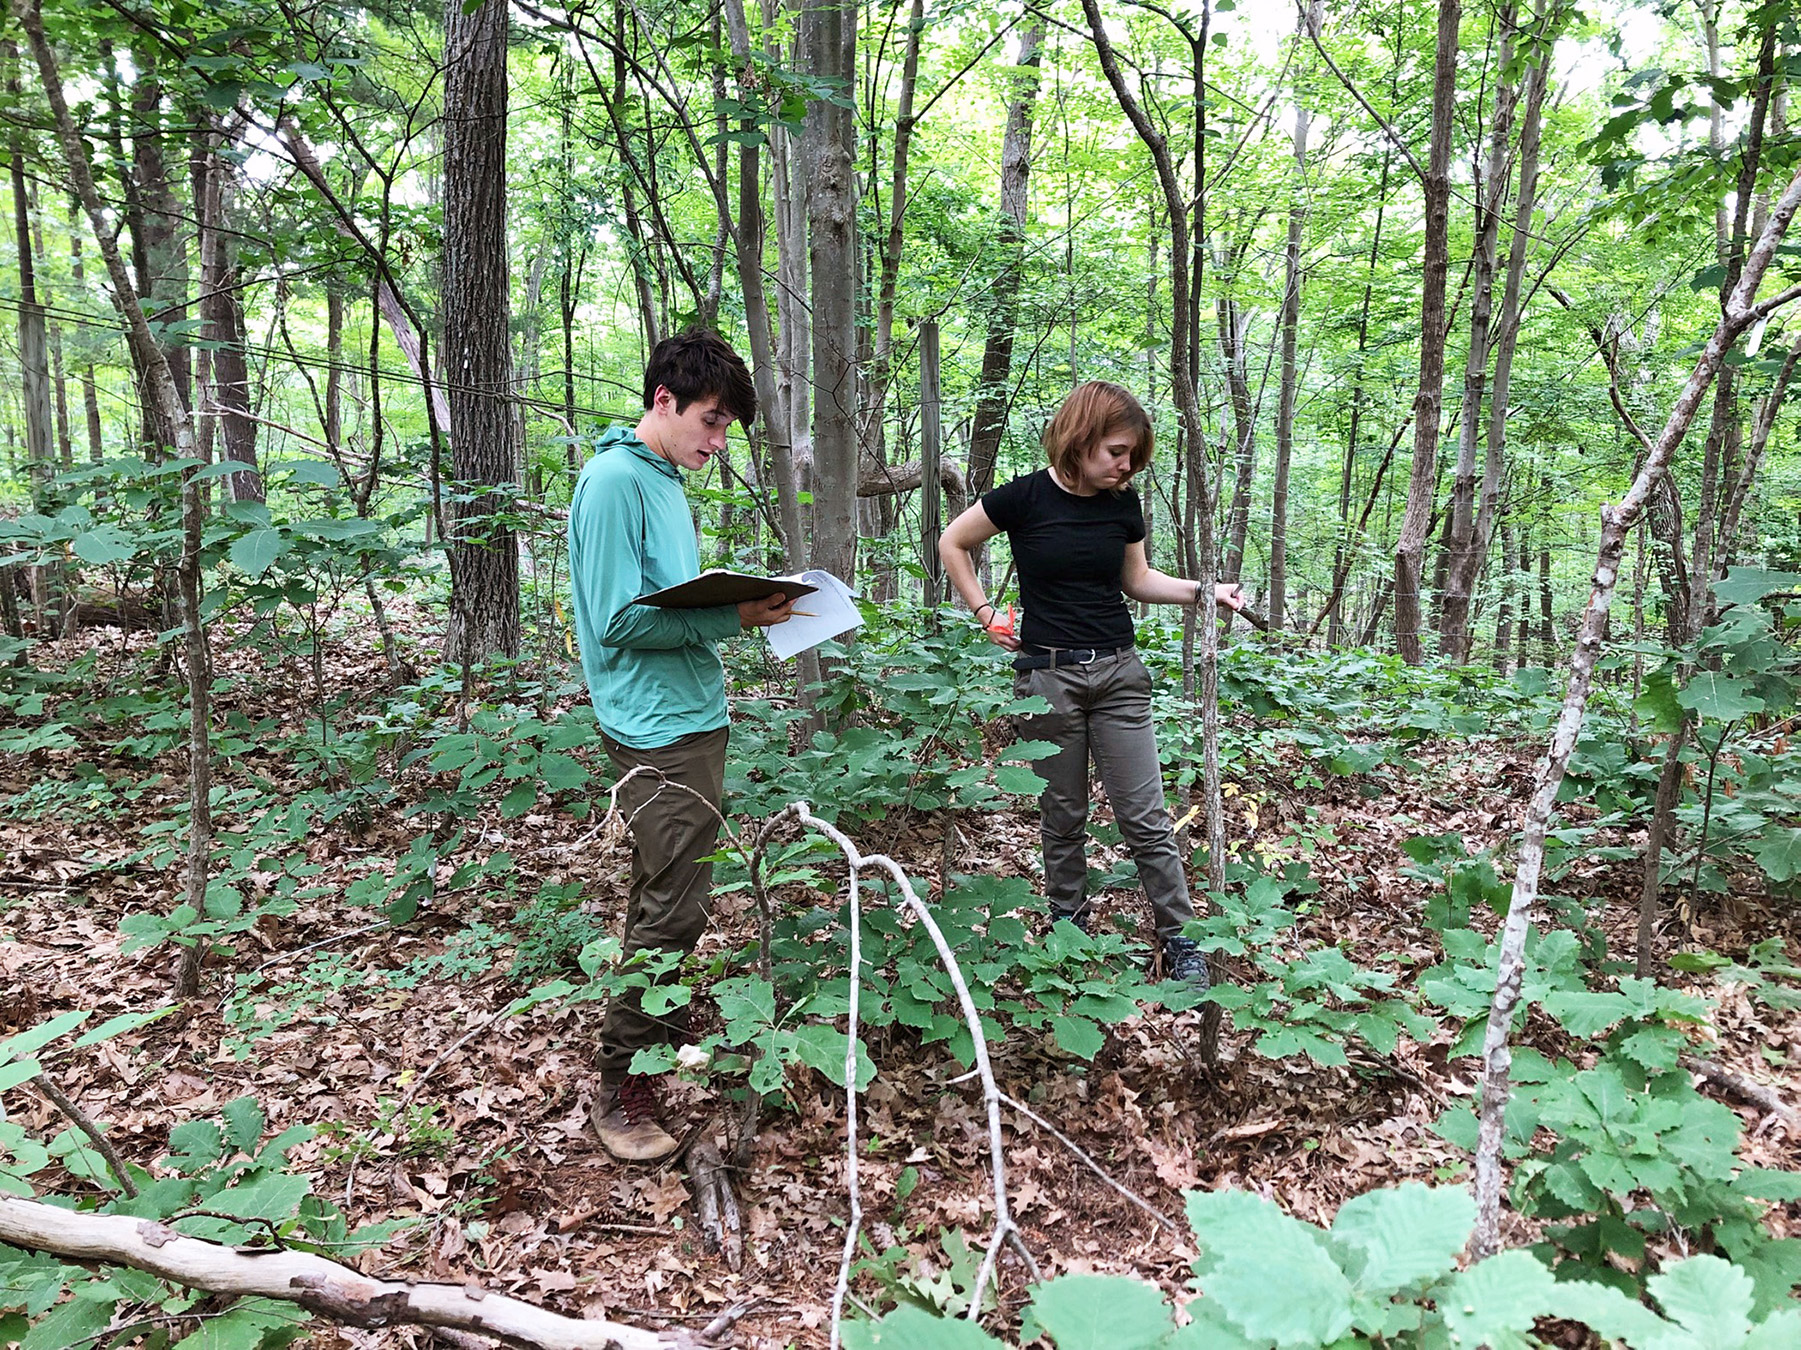 Andrew Blackburn ’24 and project assistant Isabelle Rubbo, a student at SUNY College of Environmental Science, measure saplings at the Rockefeller State Park Preserve.